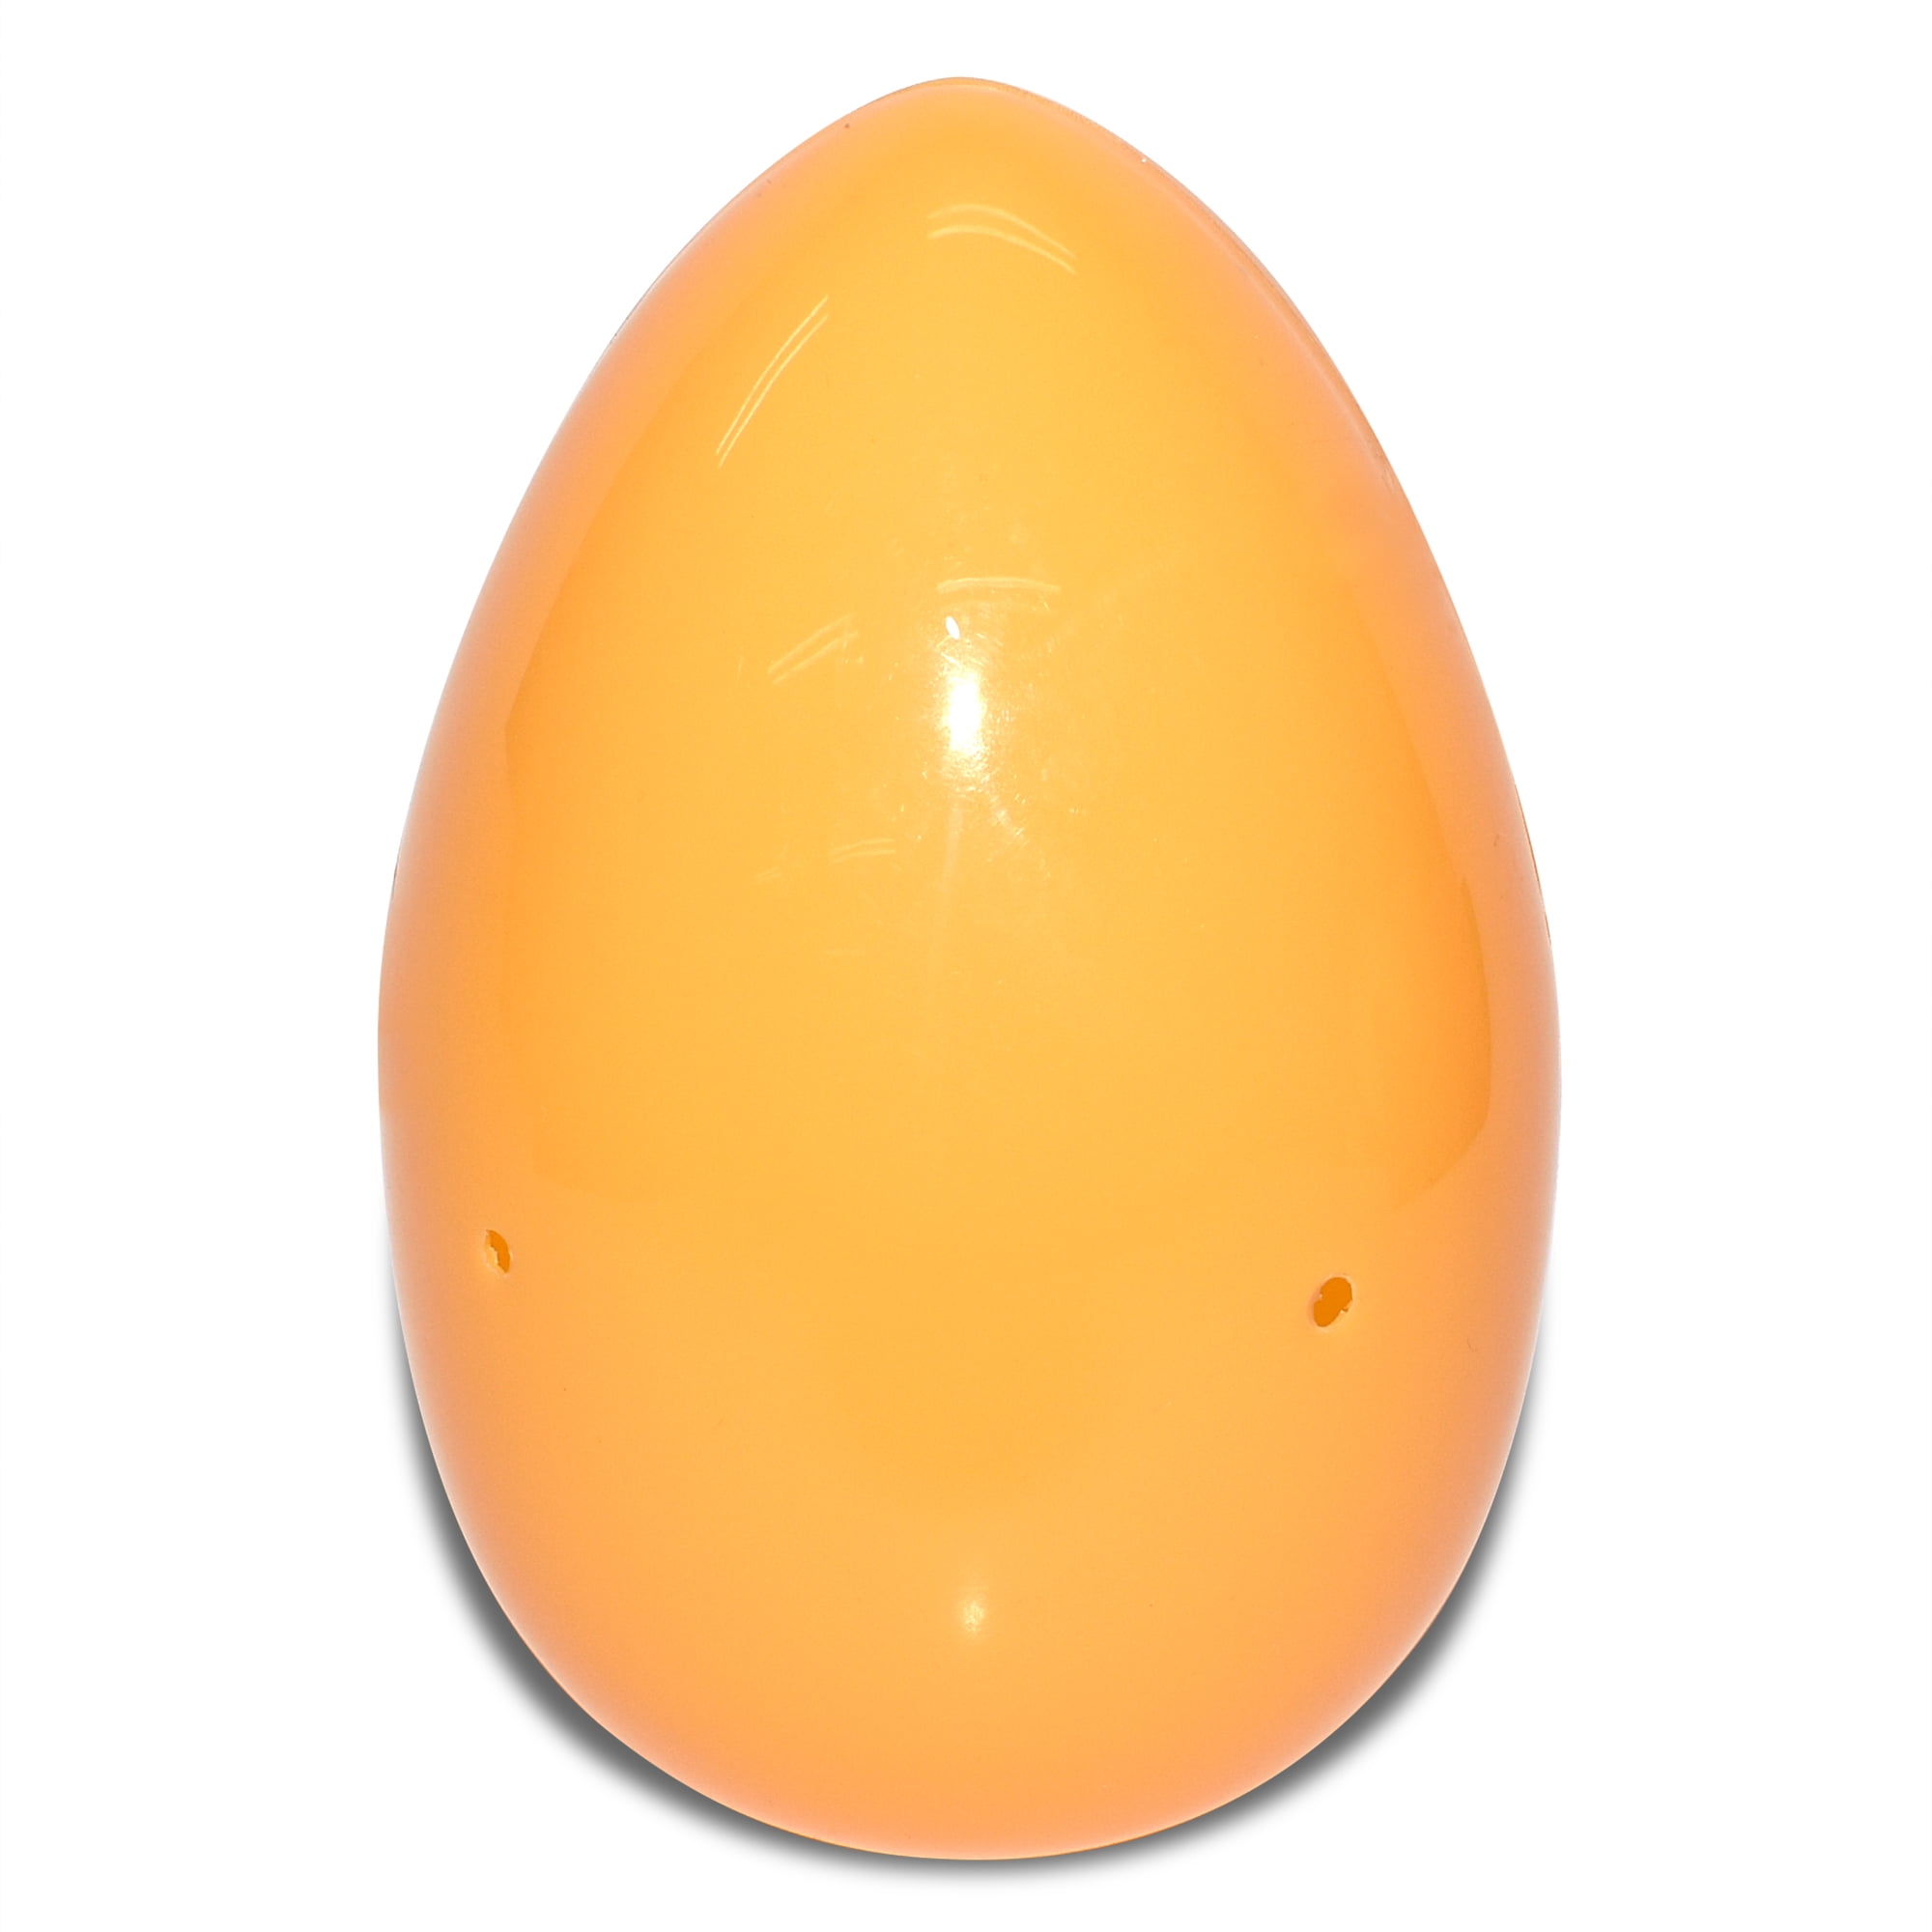 WAY TO CELEBRATE! Way to Celebrate Easter Large Plastic Egg Container Orange - 1 Piece/Pack